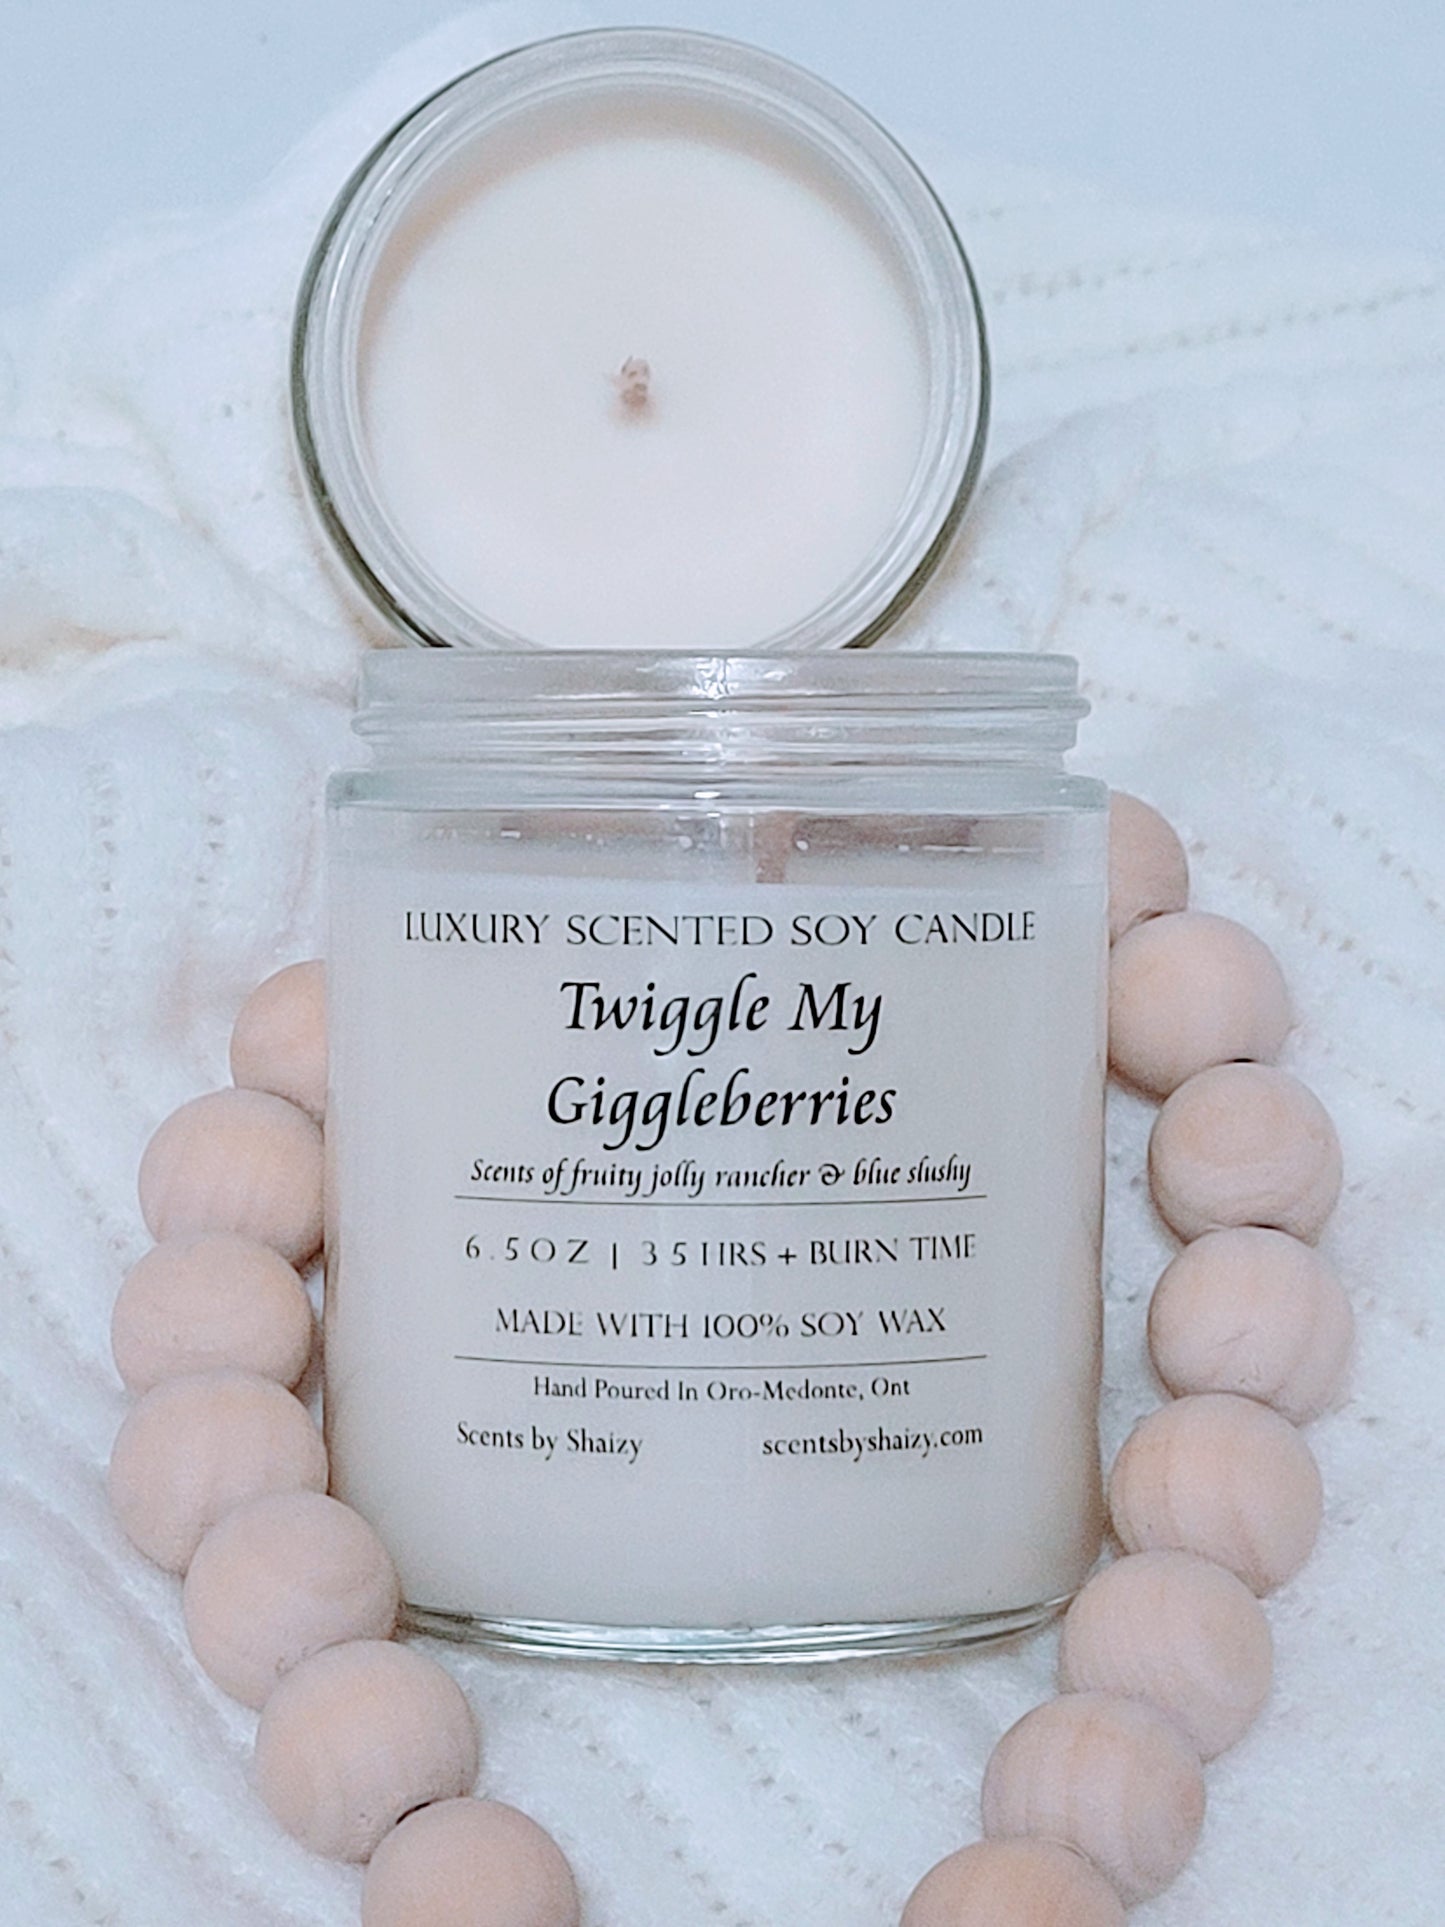 Best Soy Candles | Twiggle My Giggleberries